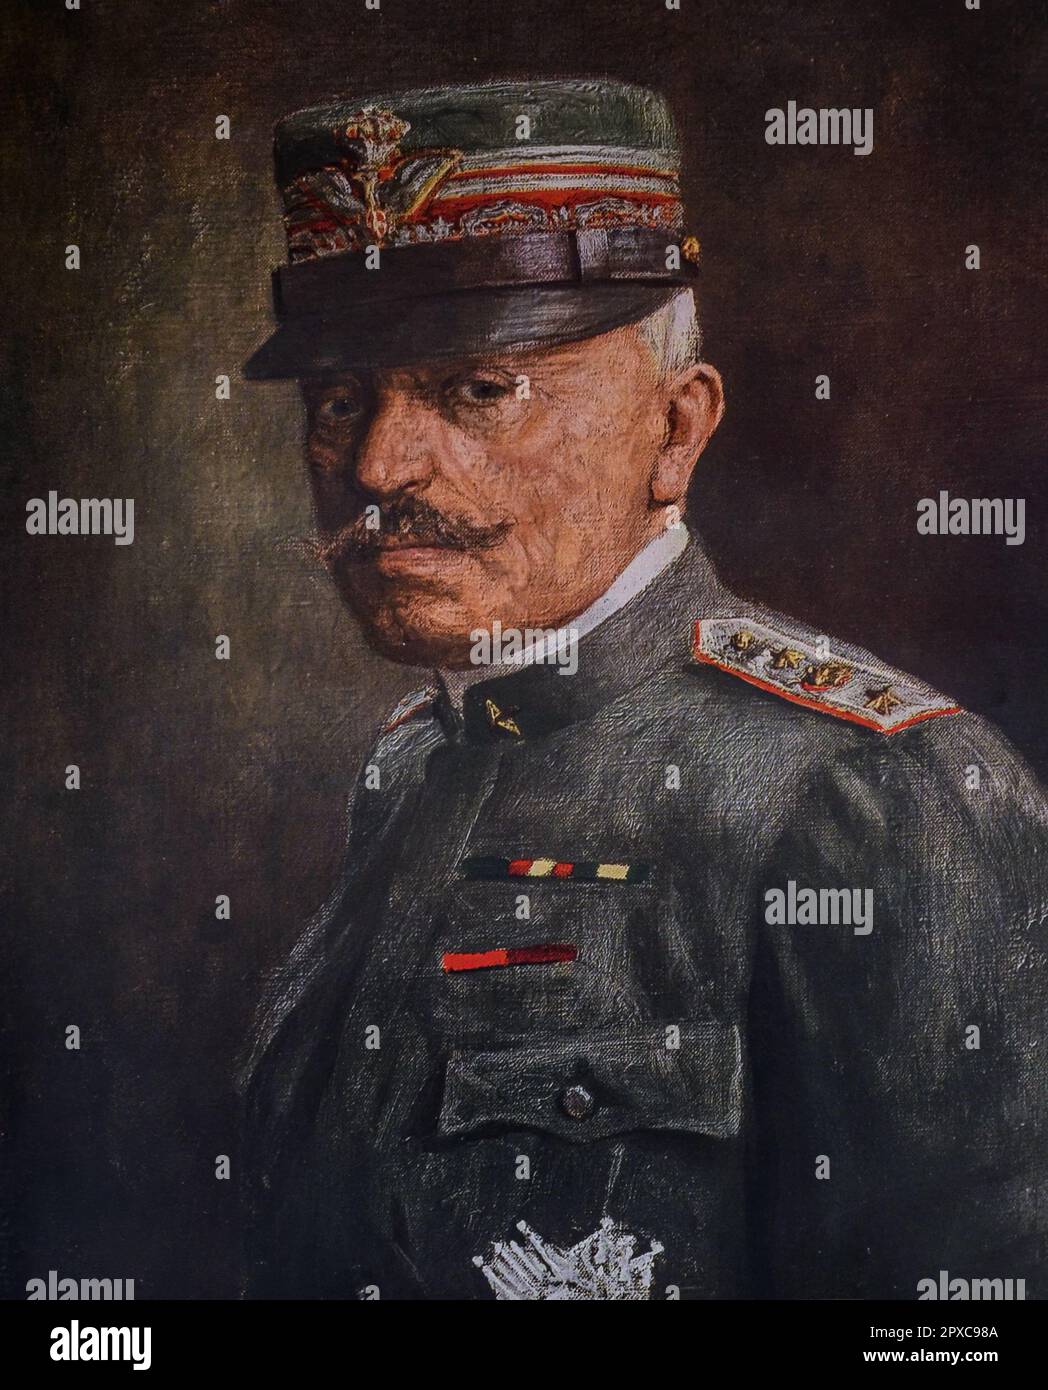 World War I. Italia at war. General Cadorna, commander-in-chief of the Italian armies Marshal of Italy Luigi Cadorna, OSML, OMS, OCI (1850–1928) was an Italian general, Marshal of Italy and Count most famous for being the Chief of Staff of the Italian Army from 1914-1917 of World War I. Stock Photo